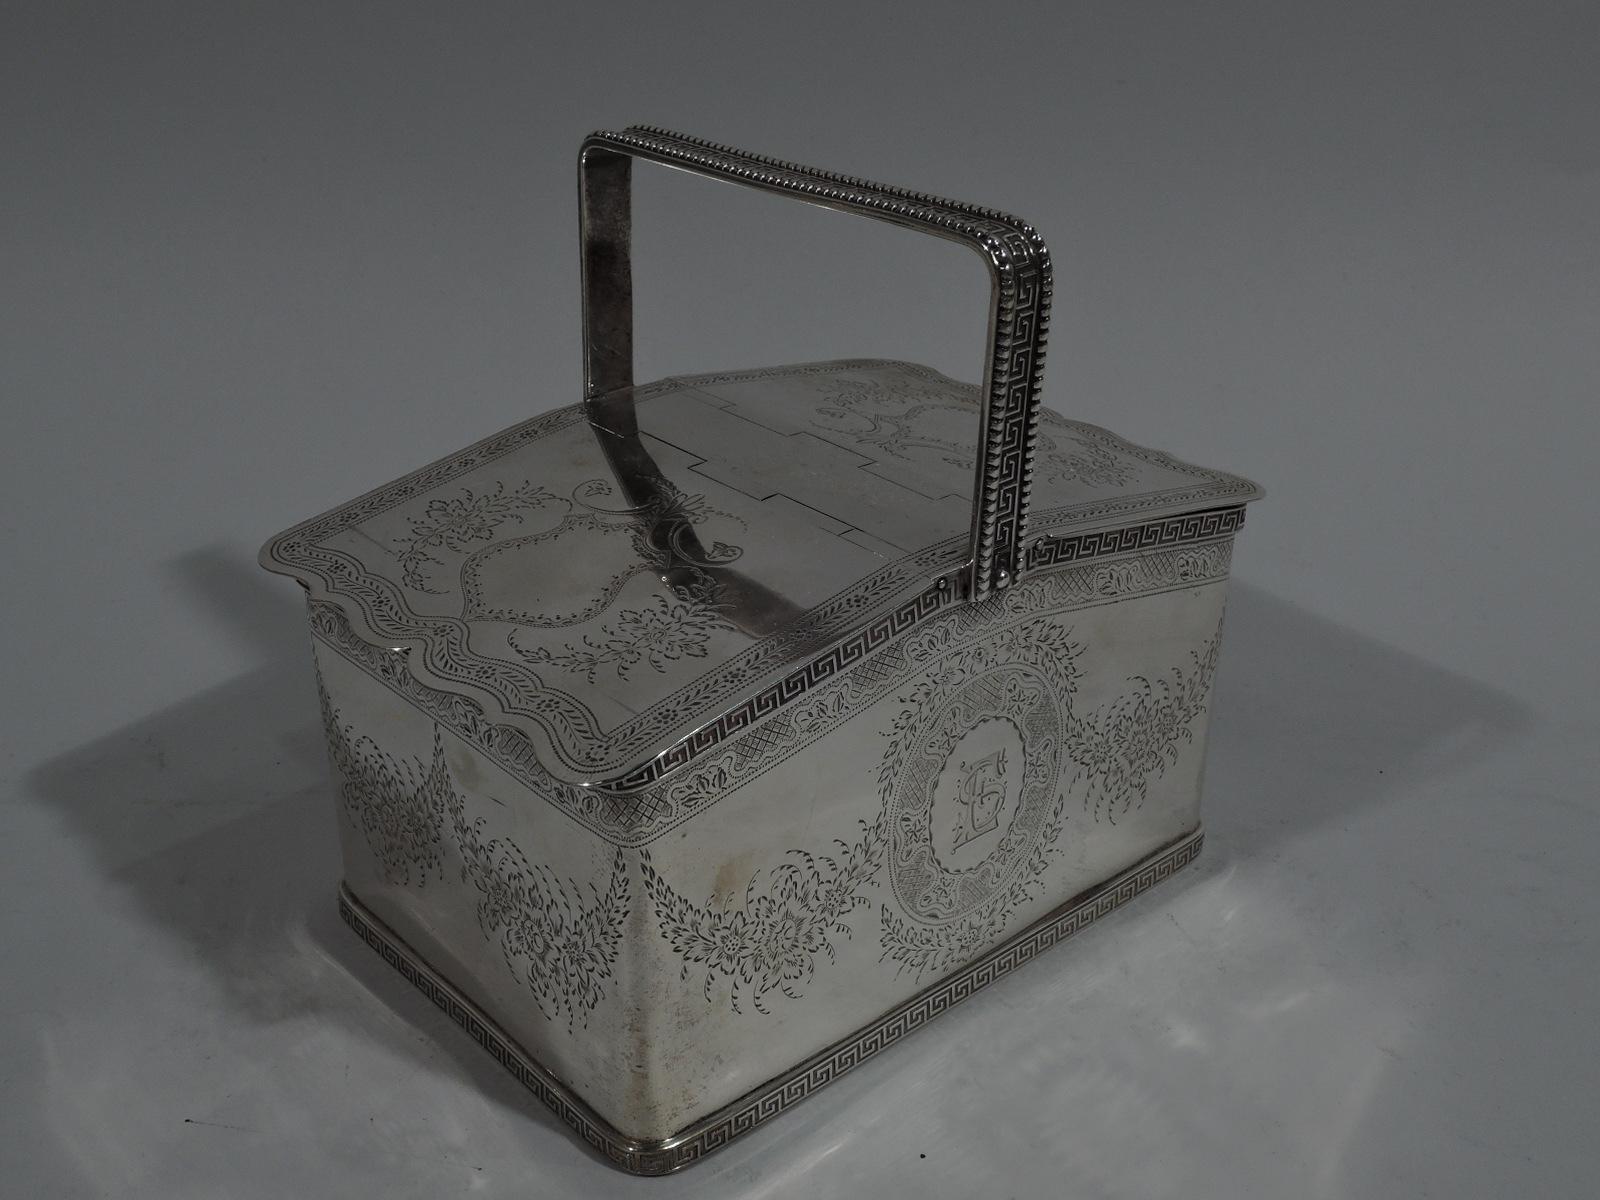 Regency Revival sterling silver tea caddy. Retailed by Tiffany & Co. at 550 Broadway, New York. Rectangular with straight sides and curved corners. Sloping rim and hinged and overlapping double covers with cutout scrolled rims. Stationary bracket